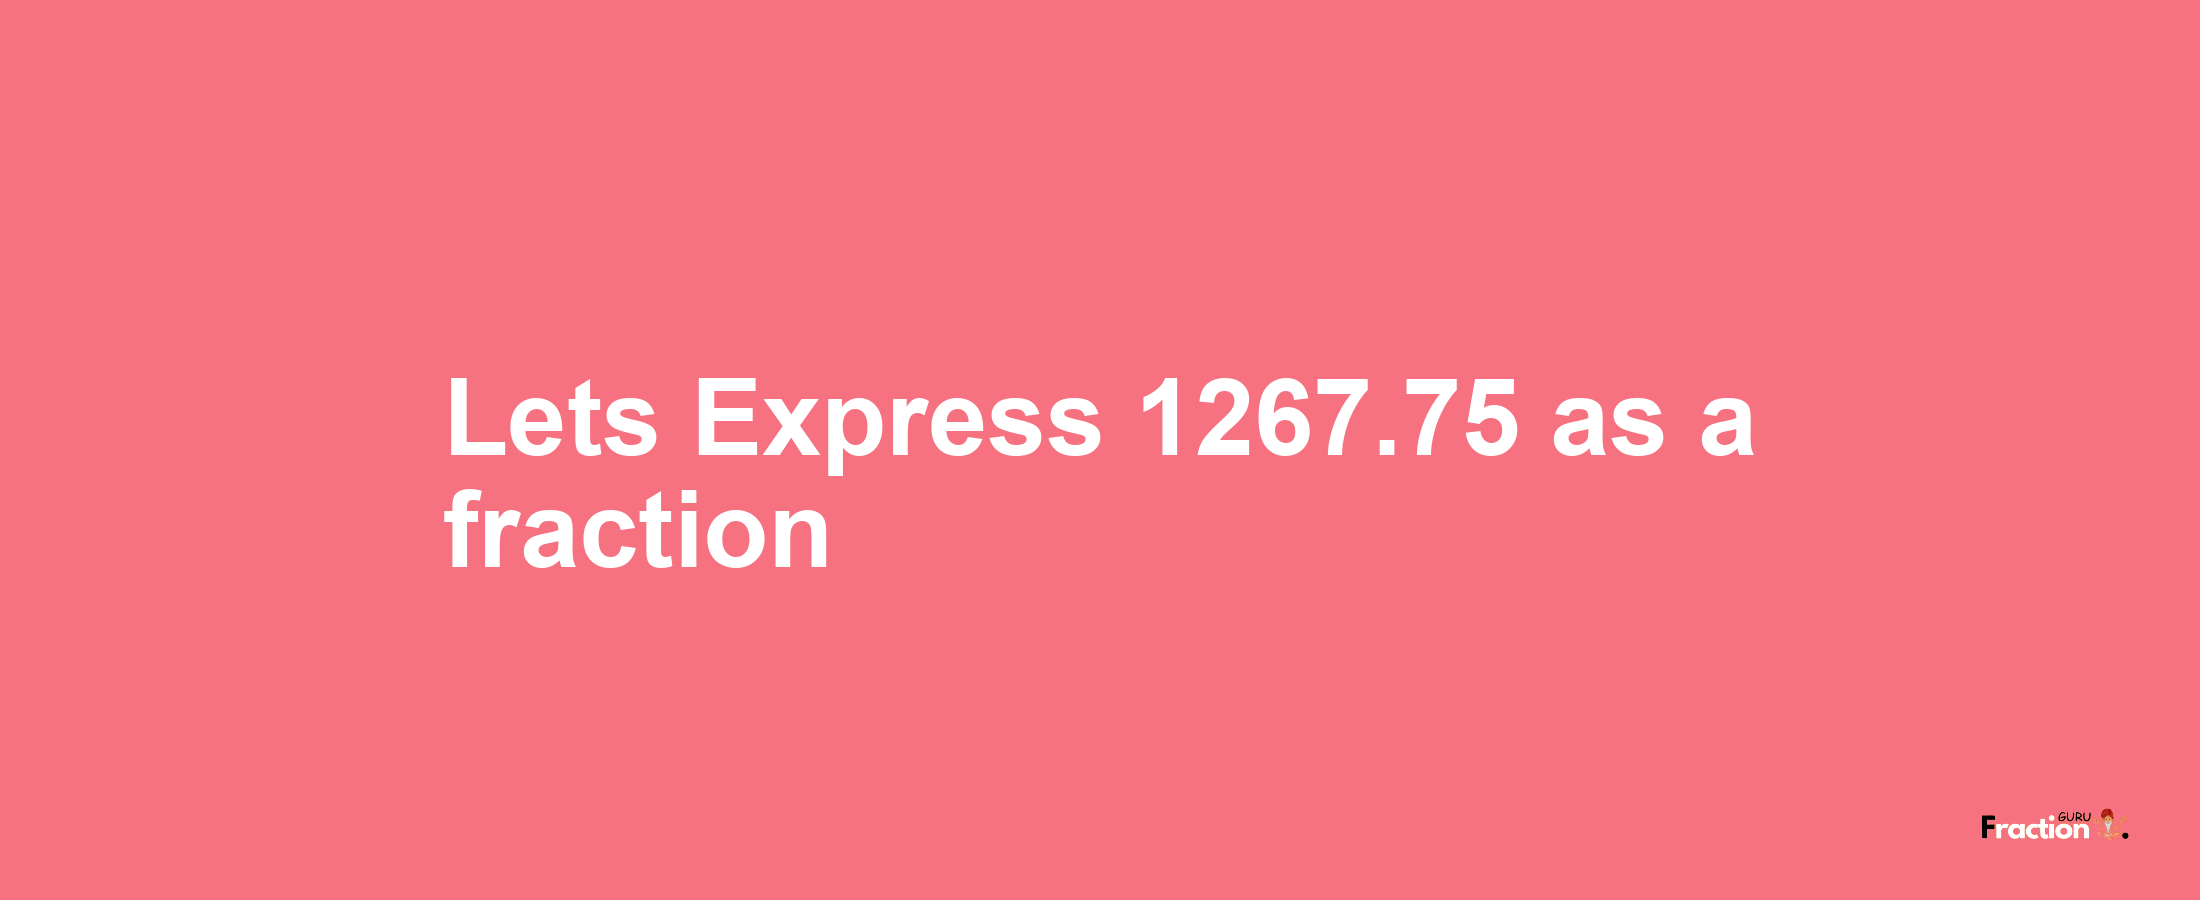 Lets Express 1267.75 as afraction